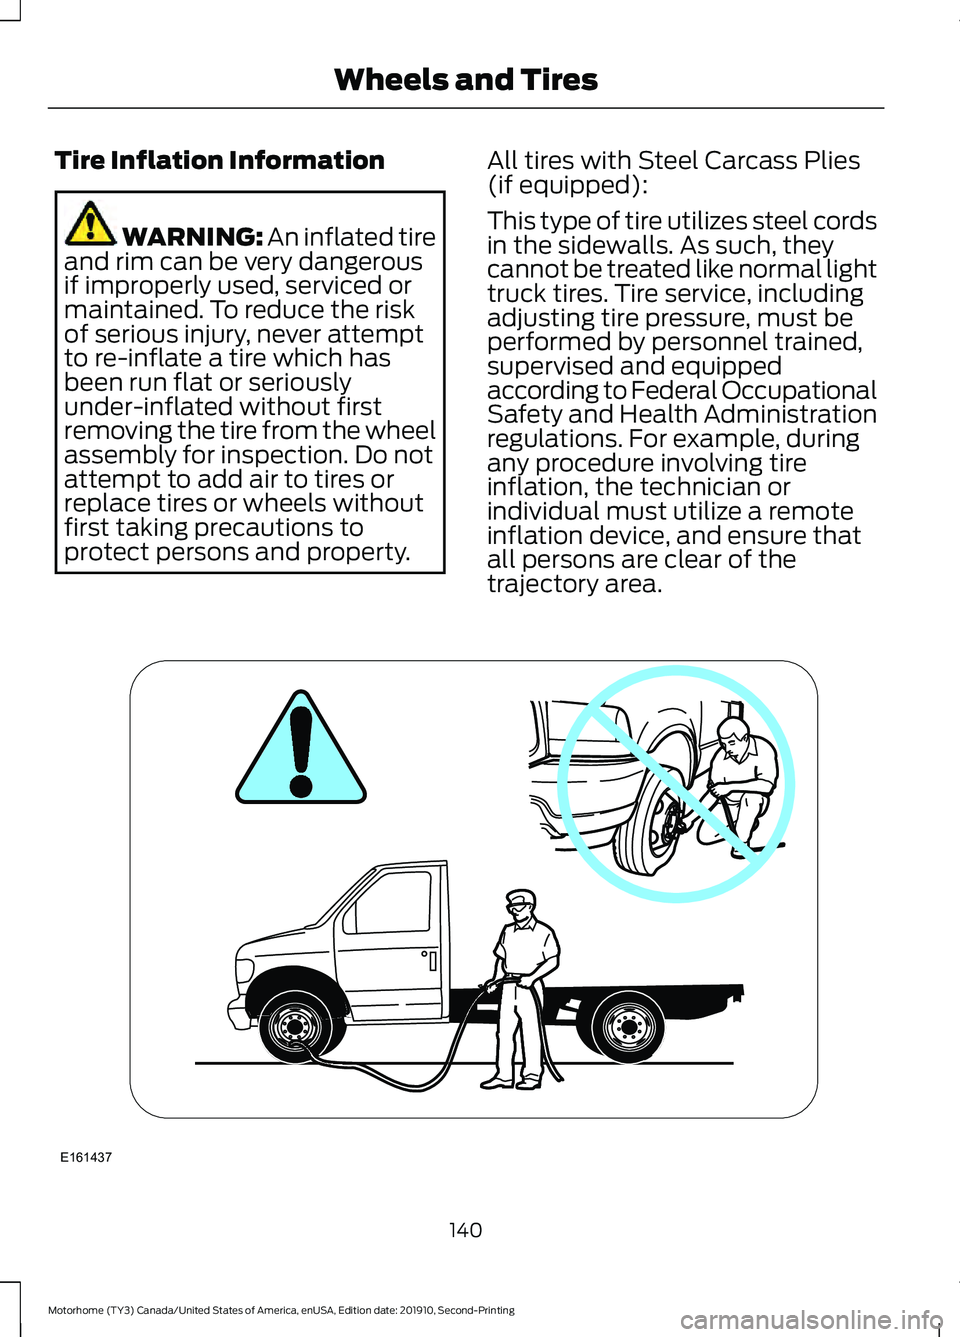 FORD F-53 2020  Owners Manual Tire Inflation Information
WARNING: An inflated tire
and rim can be very dangerous
if improperly used, serviced or
maintained. To reduce the risk
of serious injury, never attempt
to re-inflate a tire 